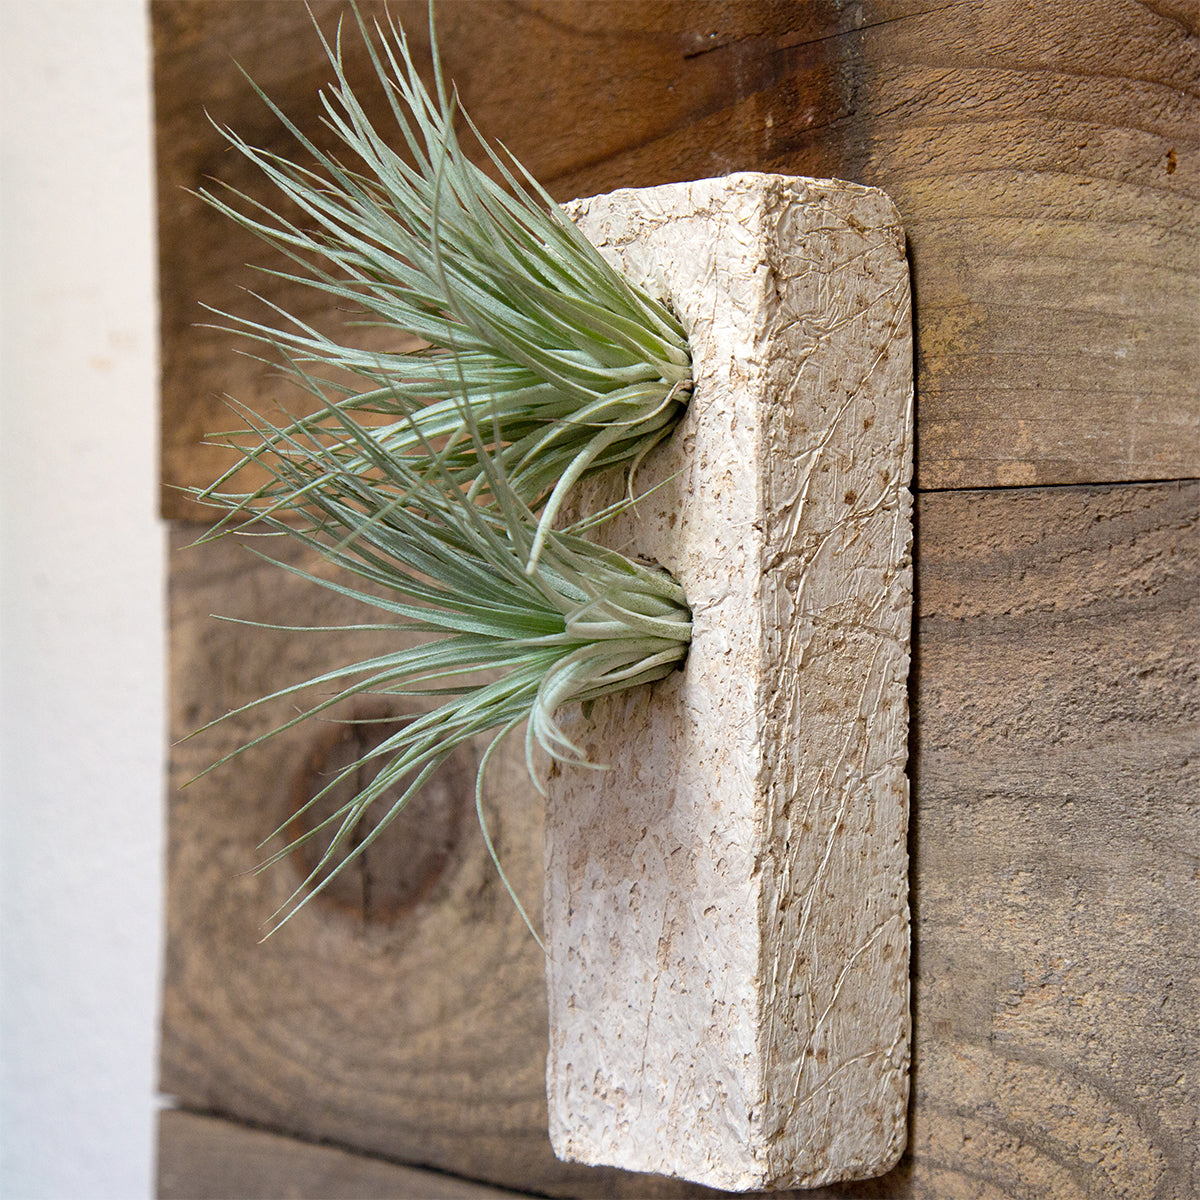 Our Air Plant Flutes are a beautiful modern way to display all varieties of Tillandsias. Their shape makes care for Tillandsias a breeze and keeps the plants happy. Perfect for creating a vertical garden, they can be hung or sit on any surface. This modern organic oblong shape fits in the palm of both hands and is a pale grey color with the feel and texture of stone but is lightweight. Two small airplants are Included.